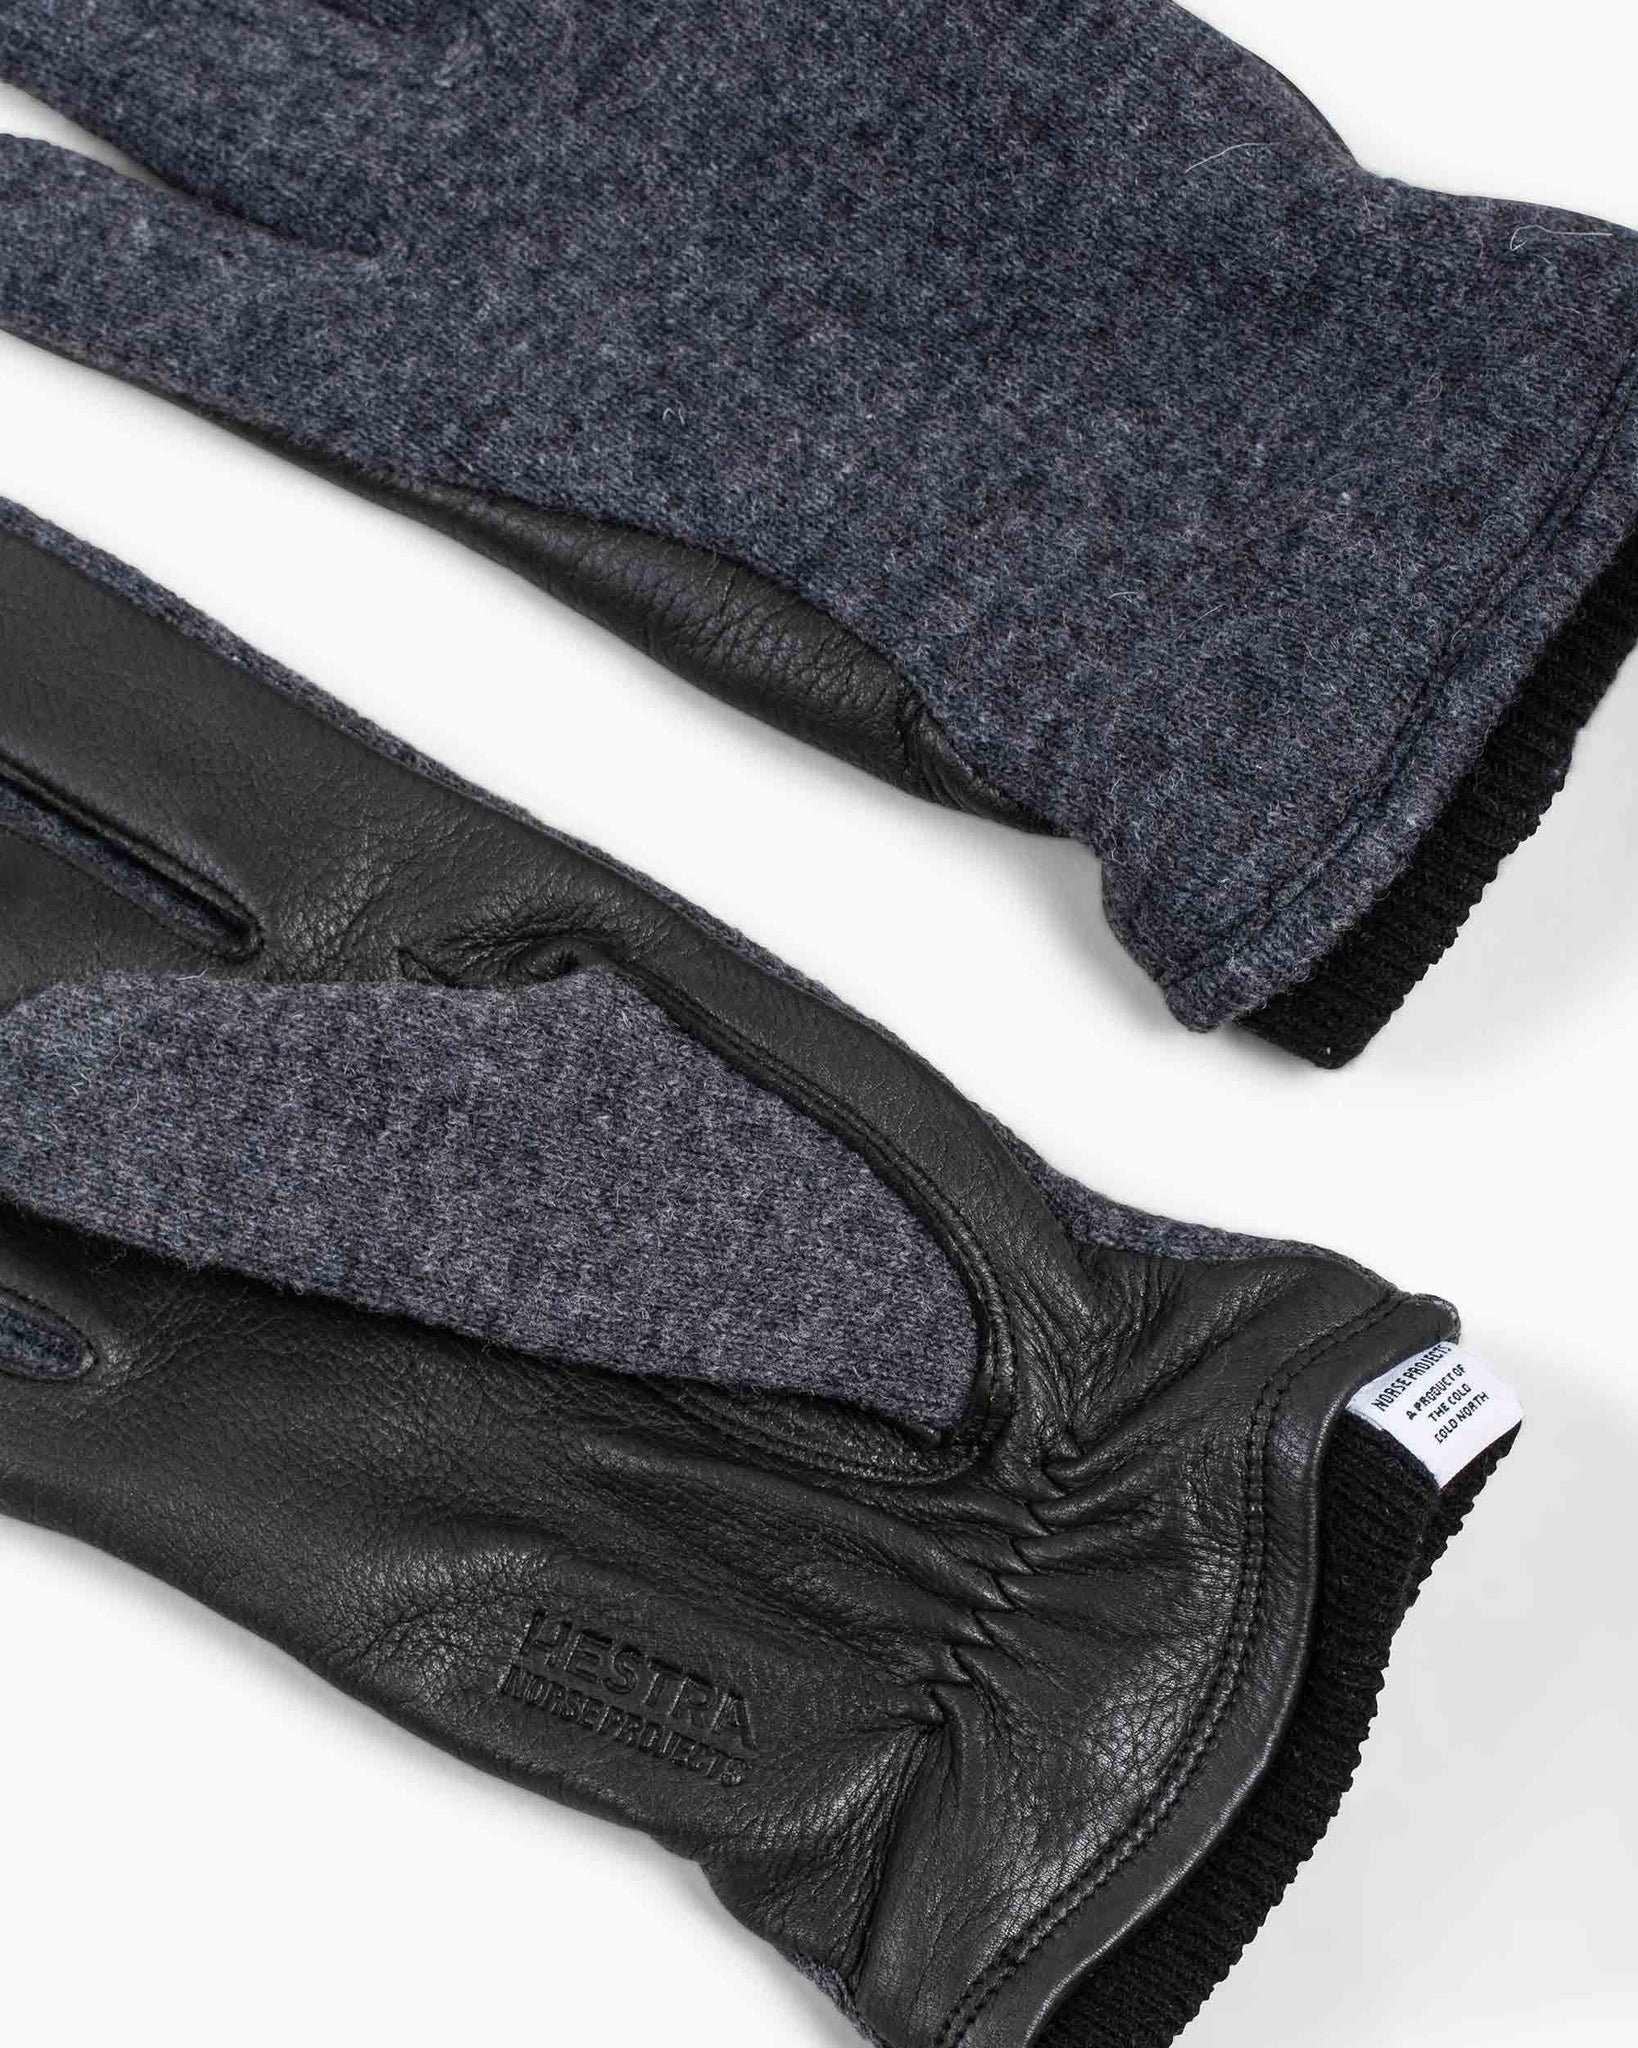 Norse Projects x Hestra Svante Charcoal Details